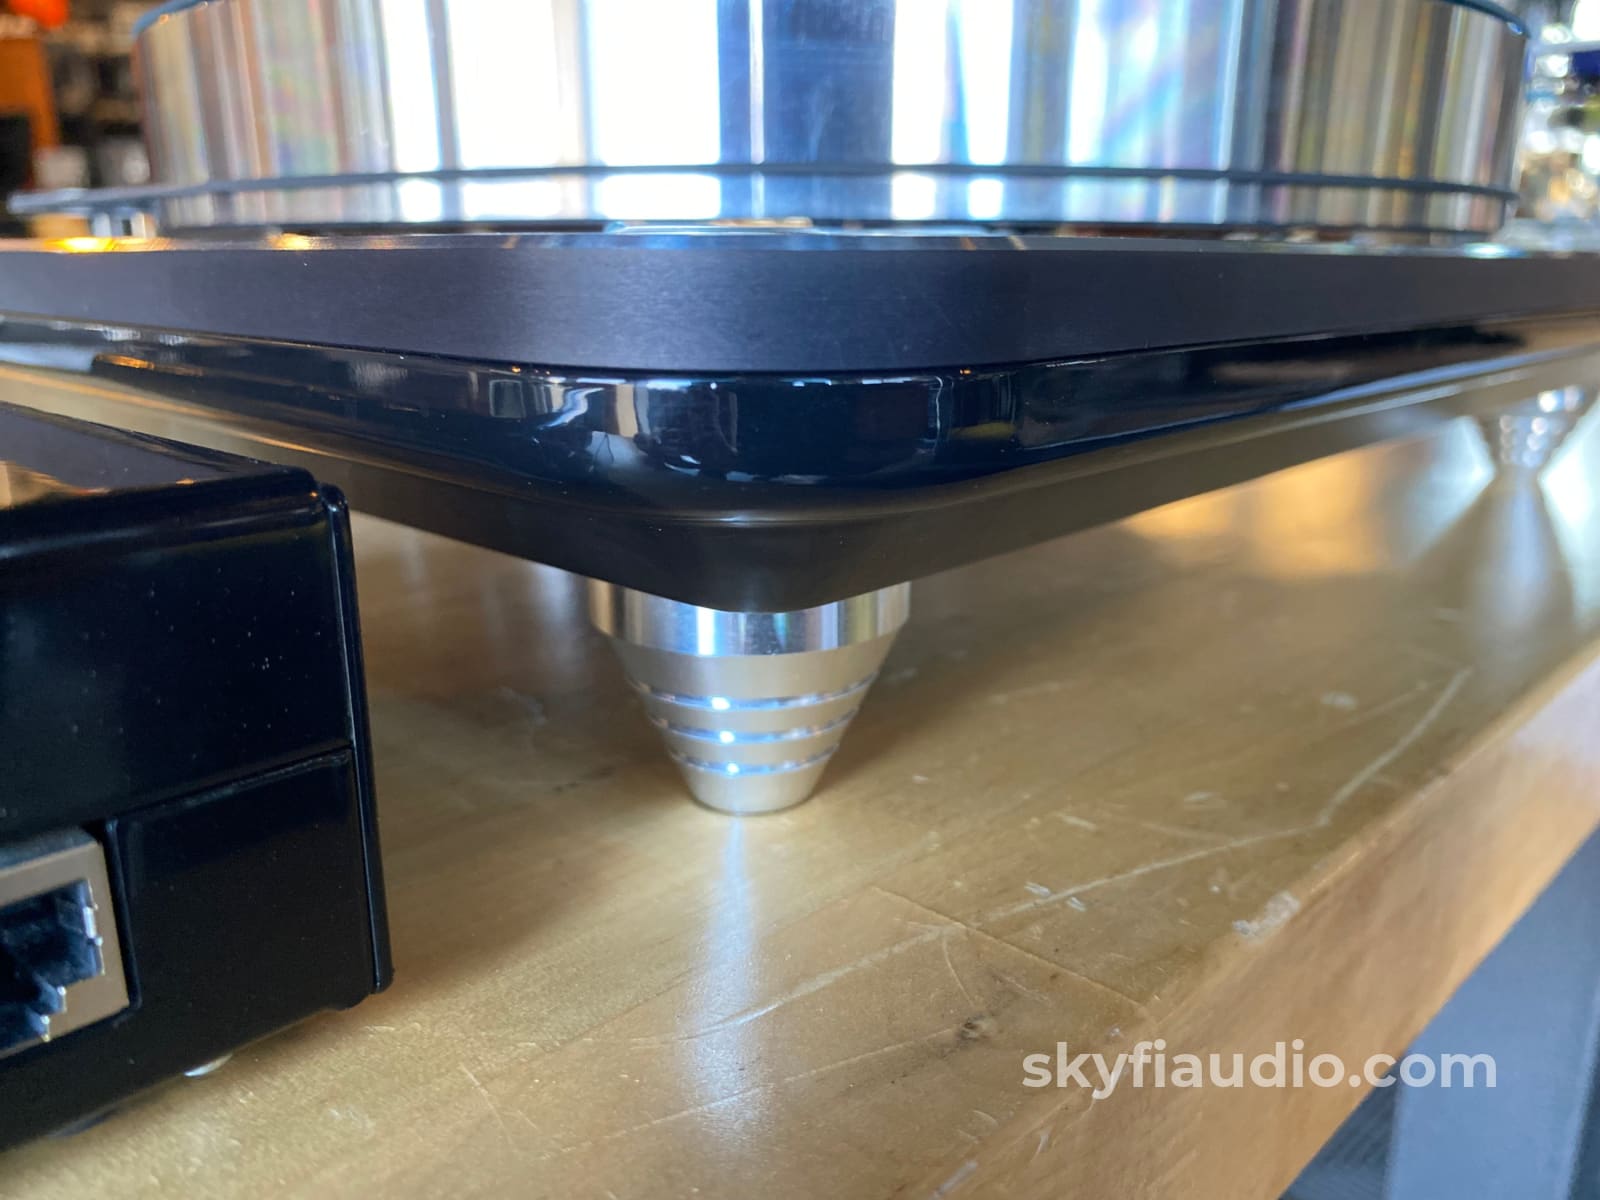 Acustic Signature Wow Xl Turntable With Upgraded Rega And Sumiko Songbird